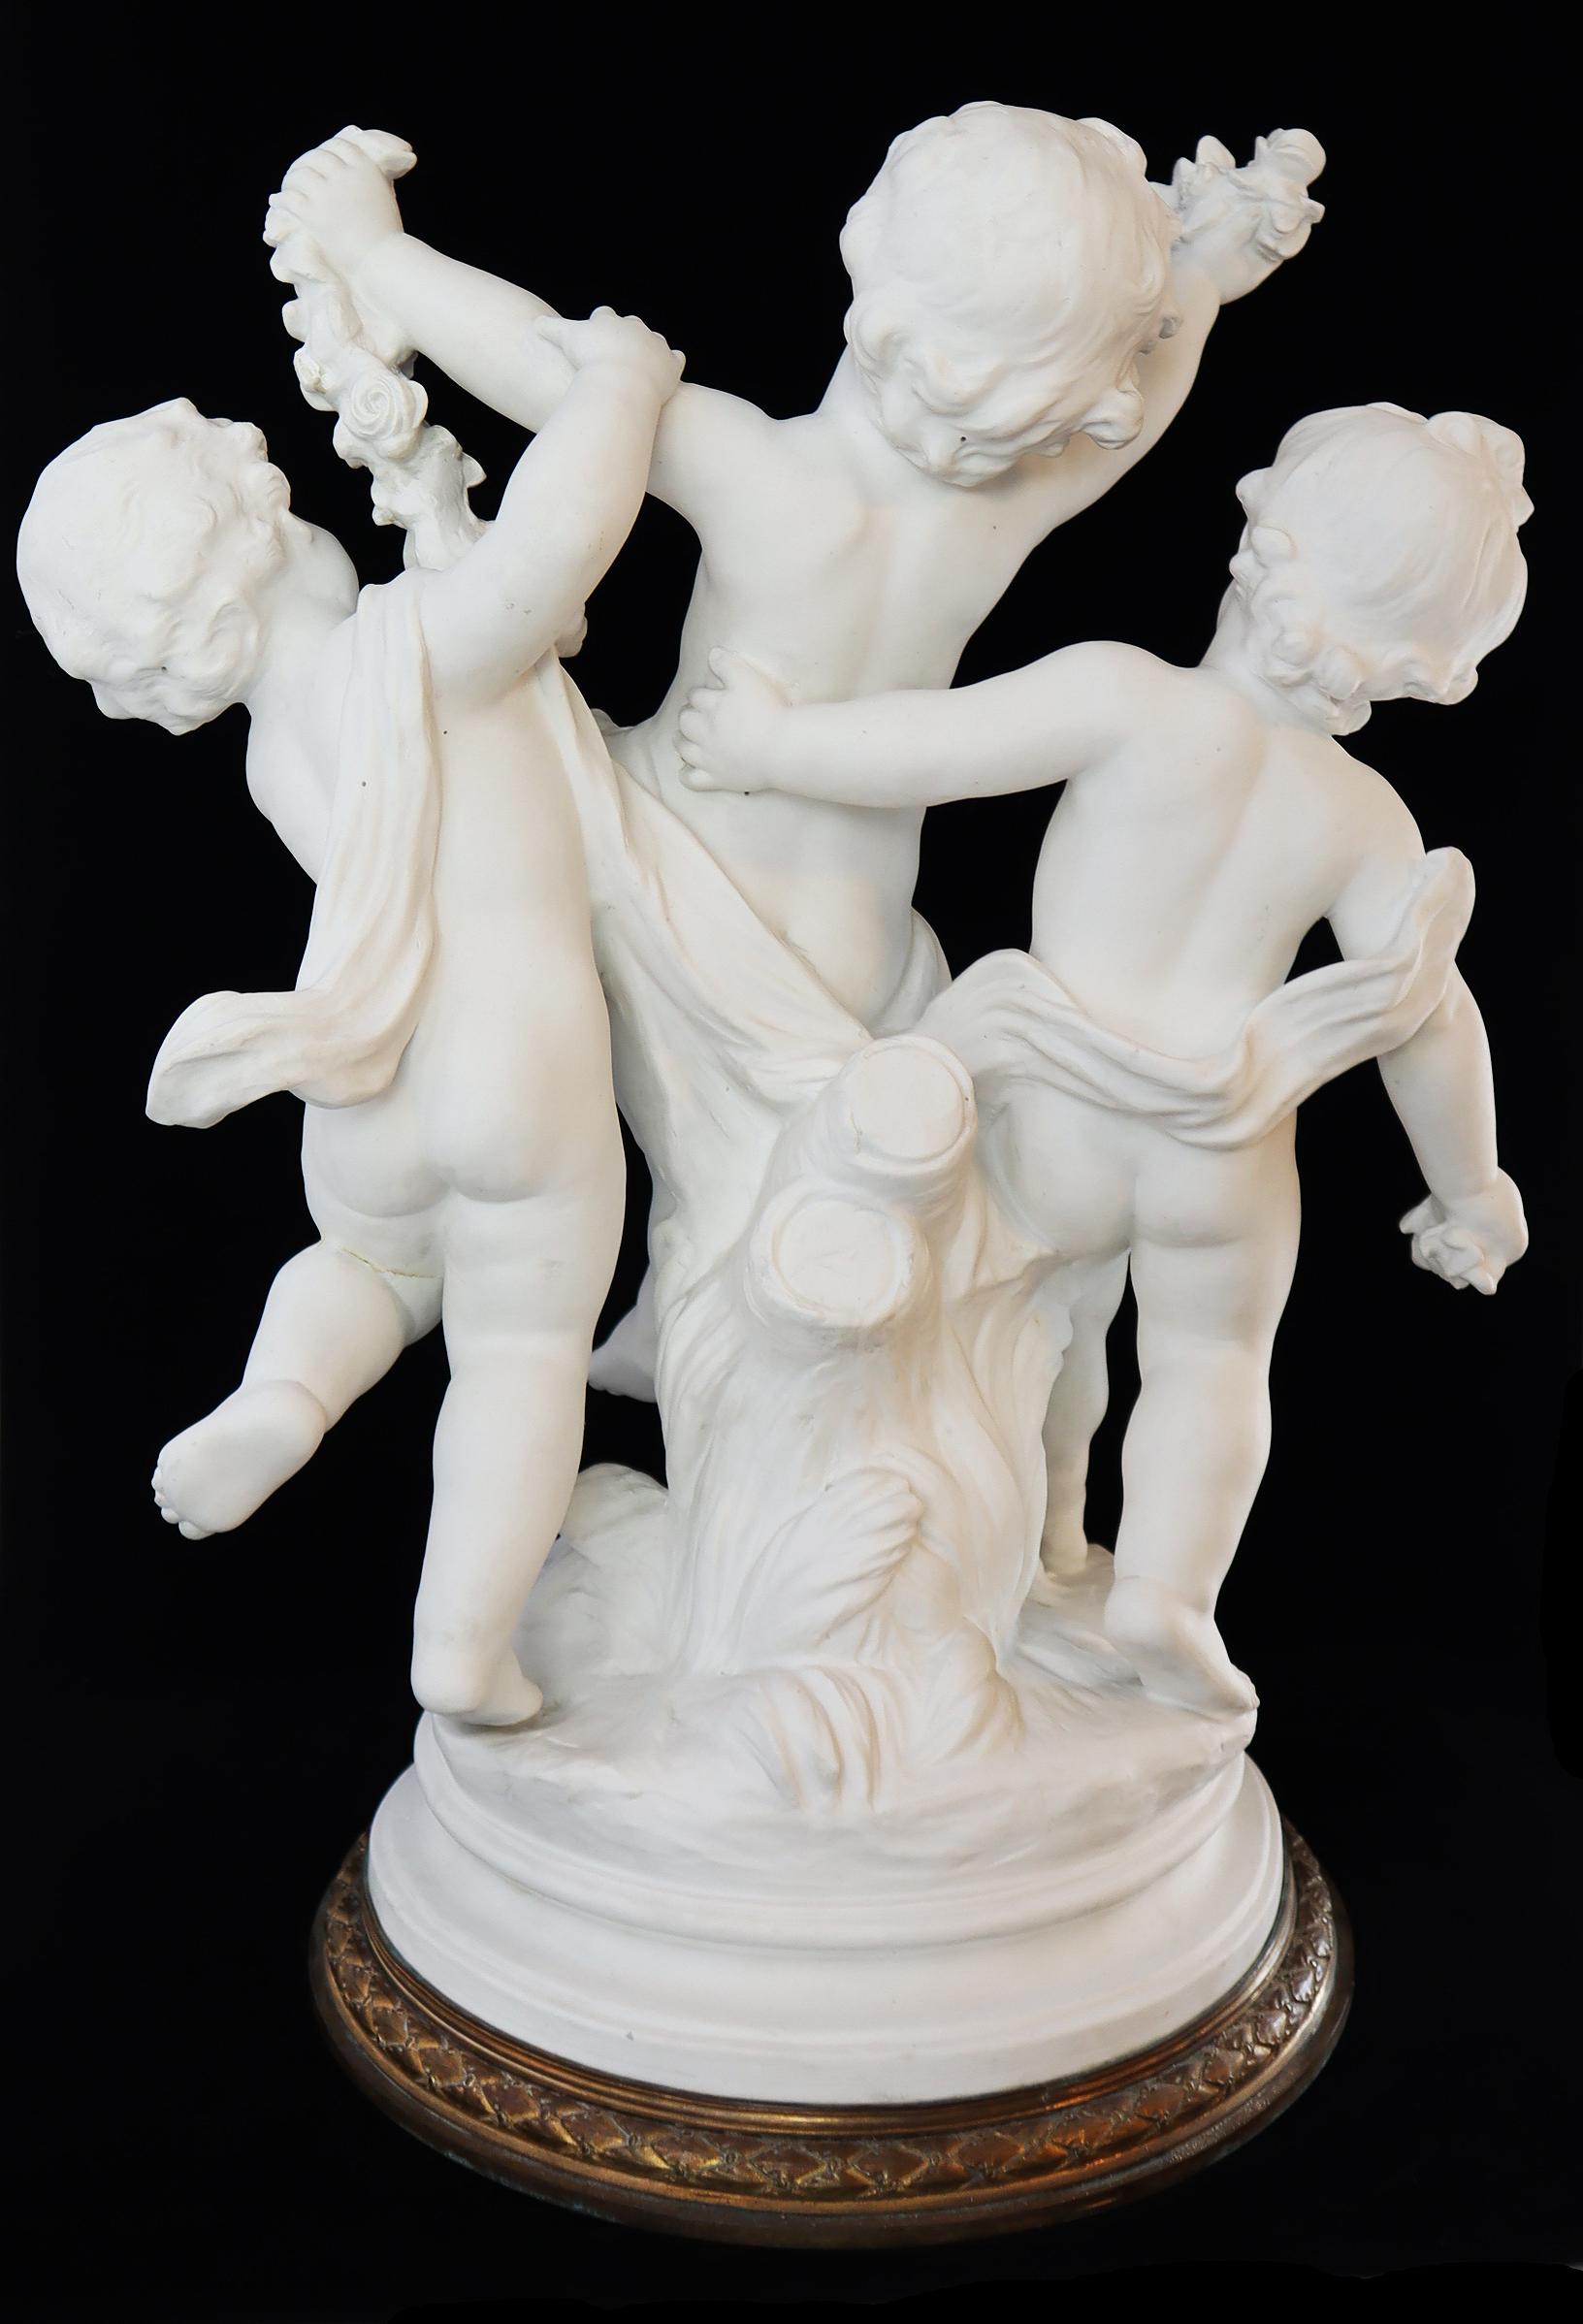 A statue of three cherubs
bisque, French, 19th century Signed on lower right. (